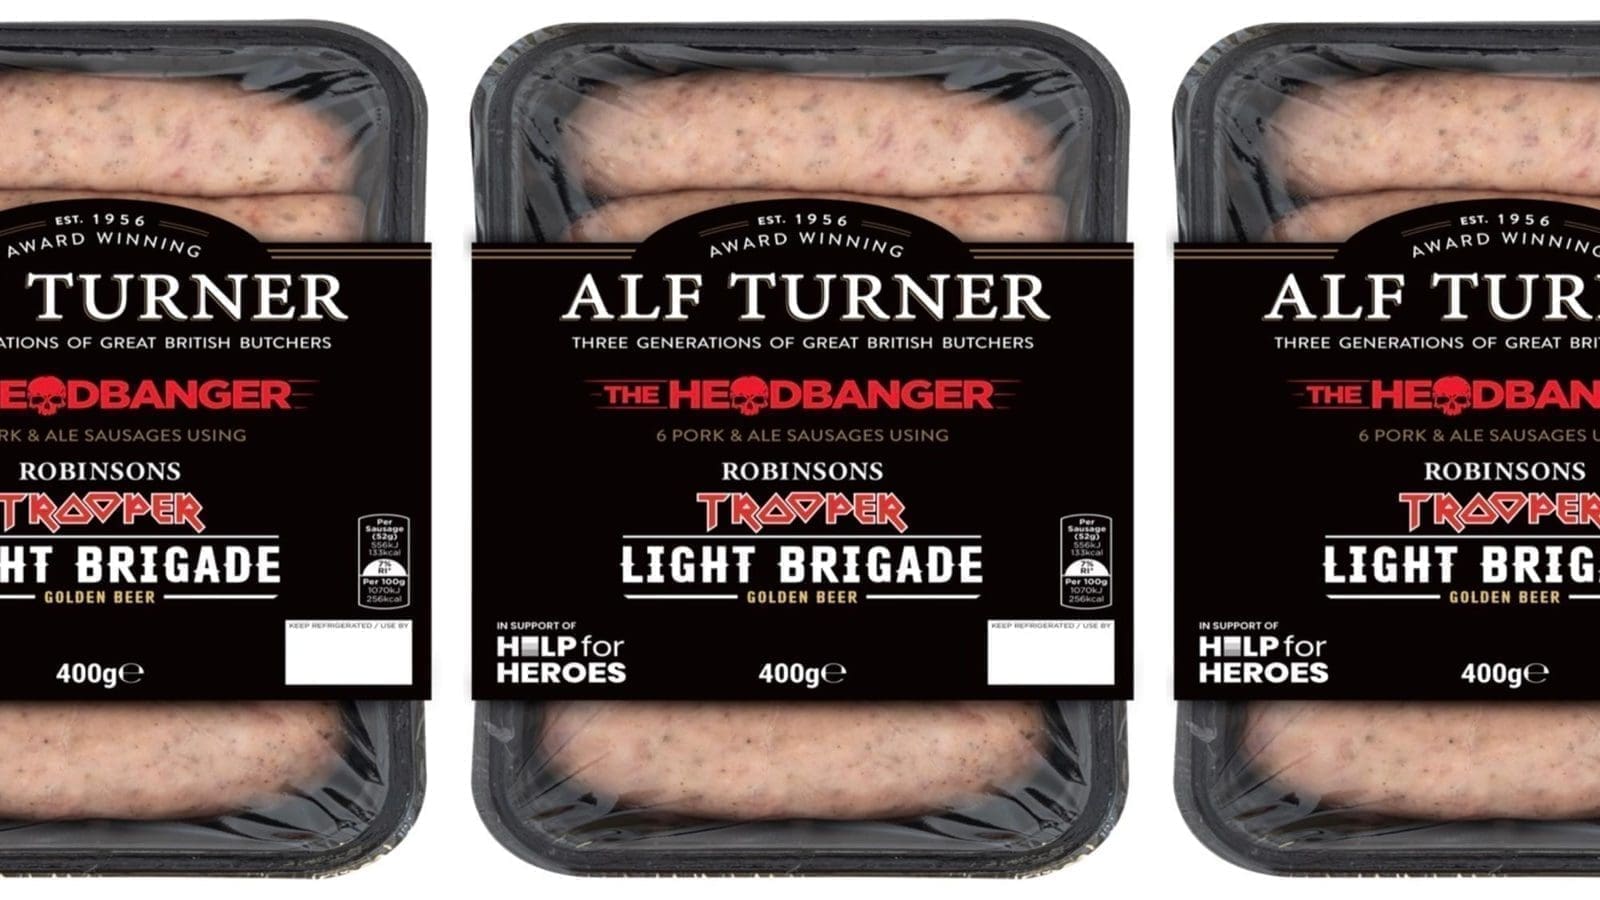 Hilton Food Solutions acquires minority stake in UK sausage brand to expand product portfolio 